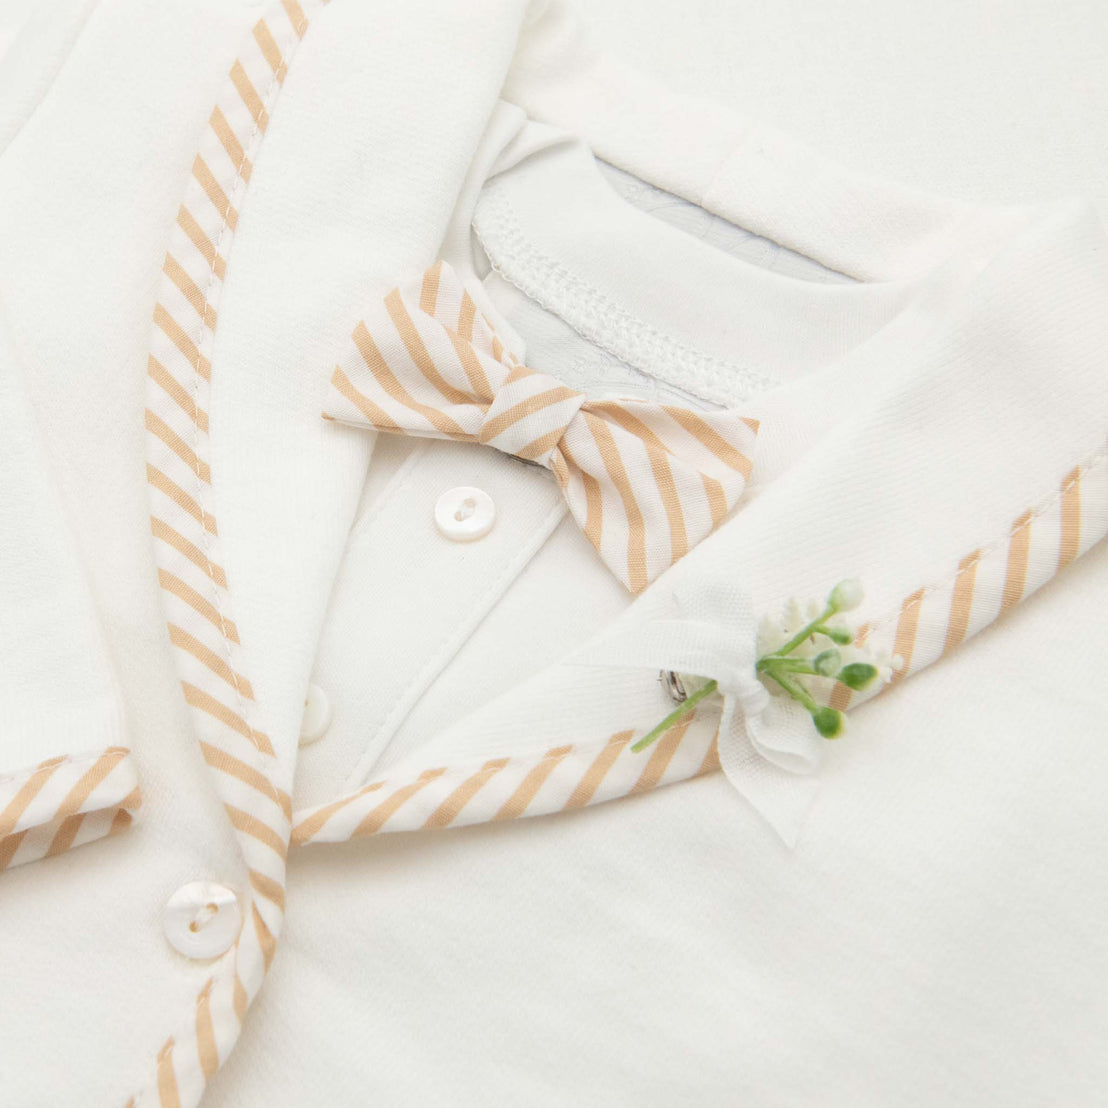 Tan striped cotton bow with and boutonniere  on baby boy party jacket